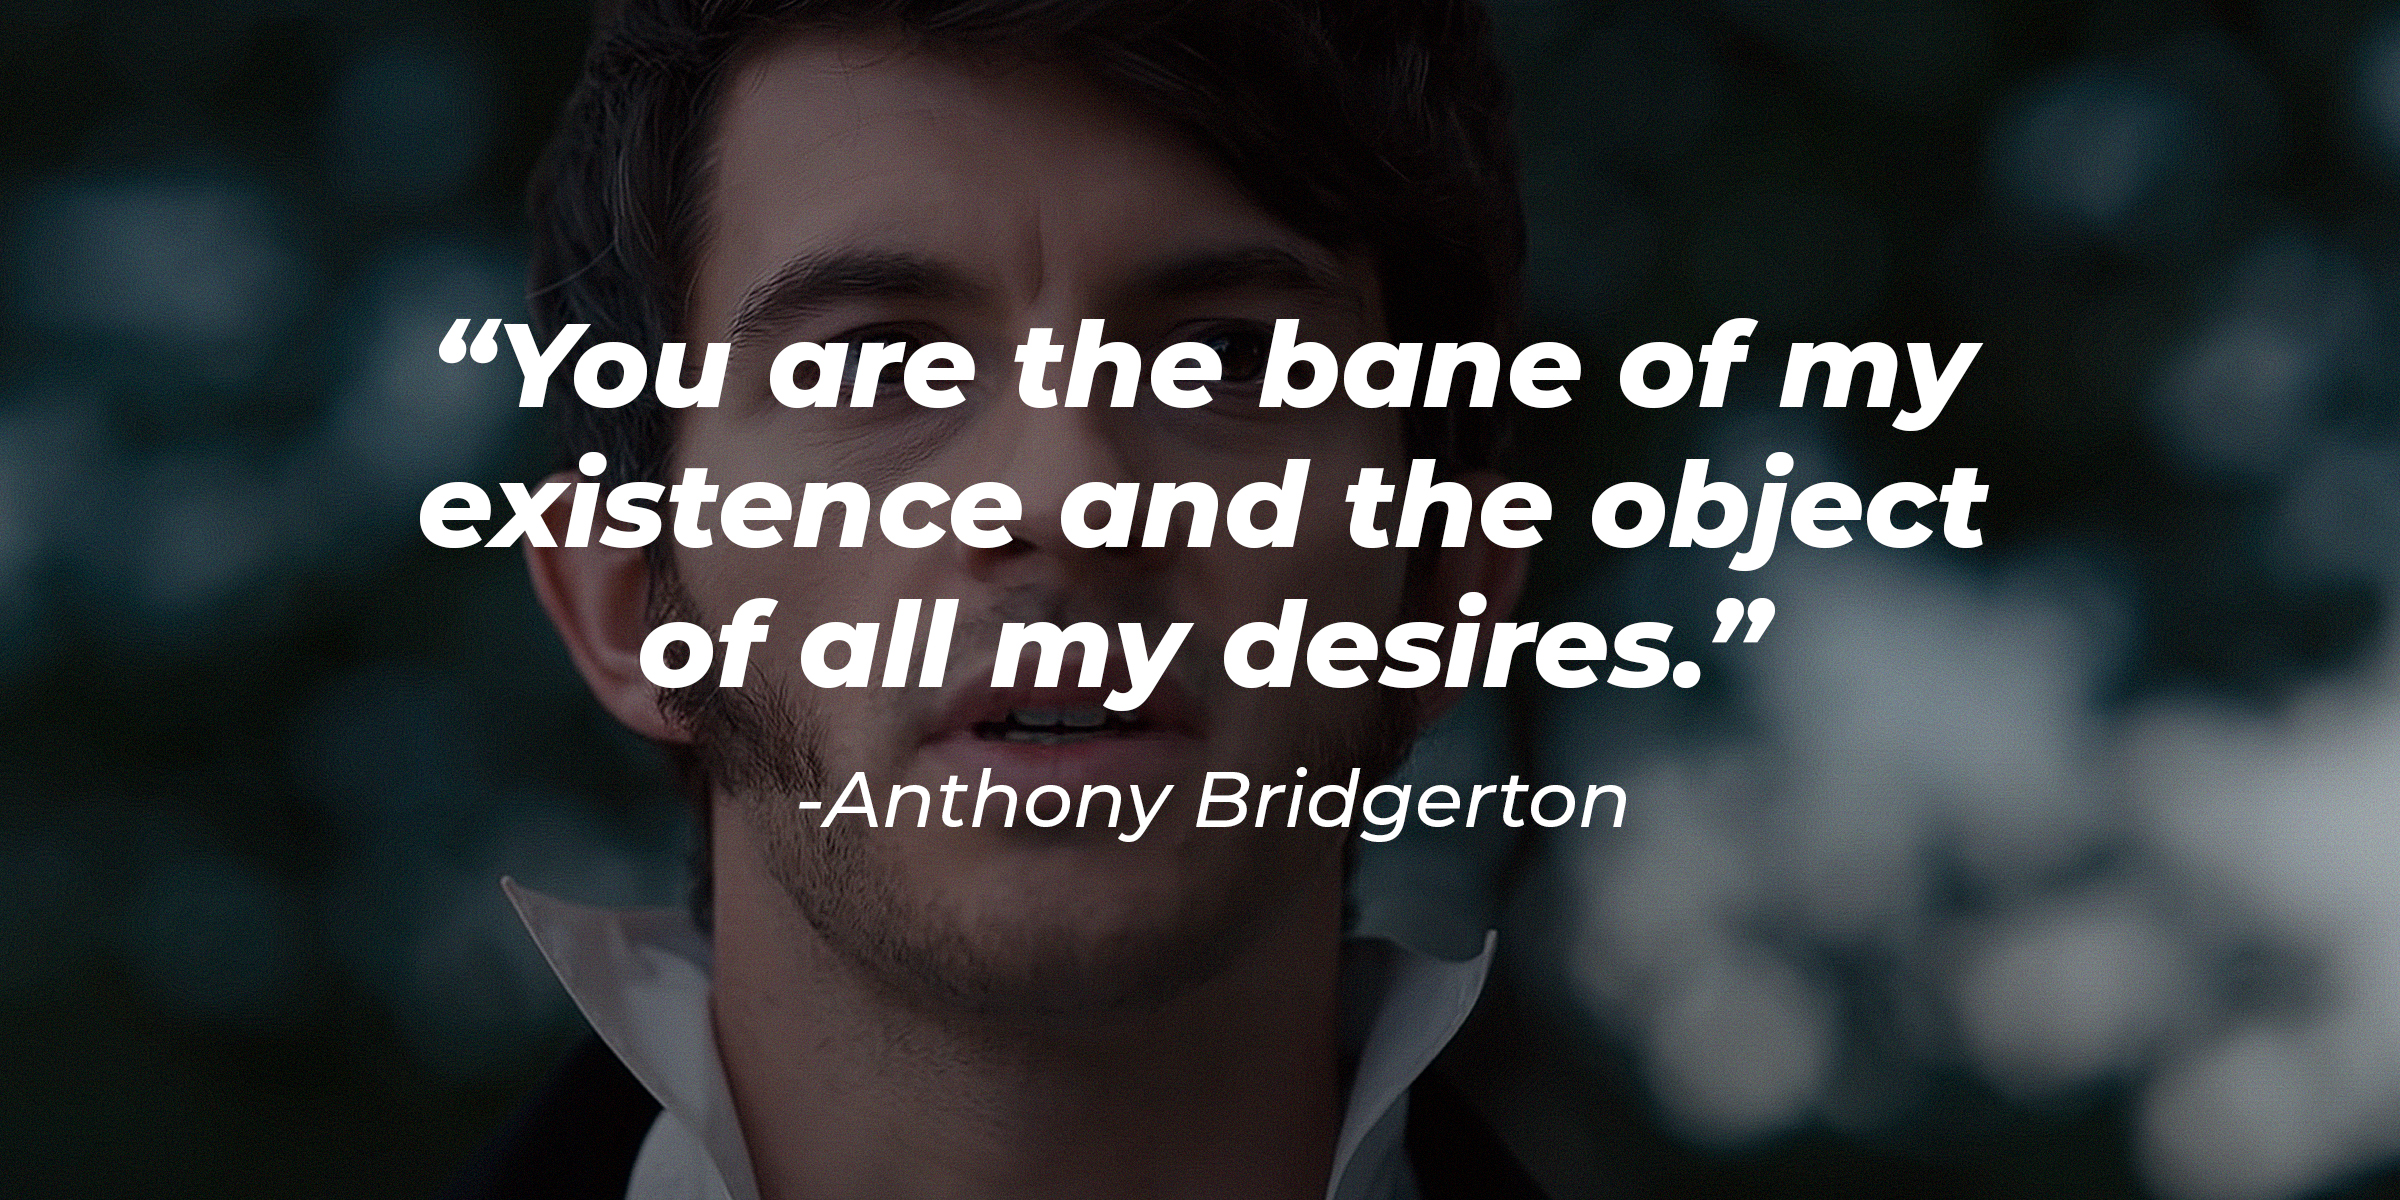 An image of Anthony Bridgerton with the quote: "You are the bane of my existence and the object of all my desires." | Source: youtube.com/Netflix